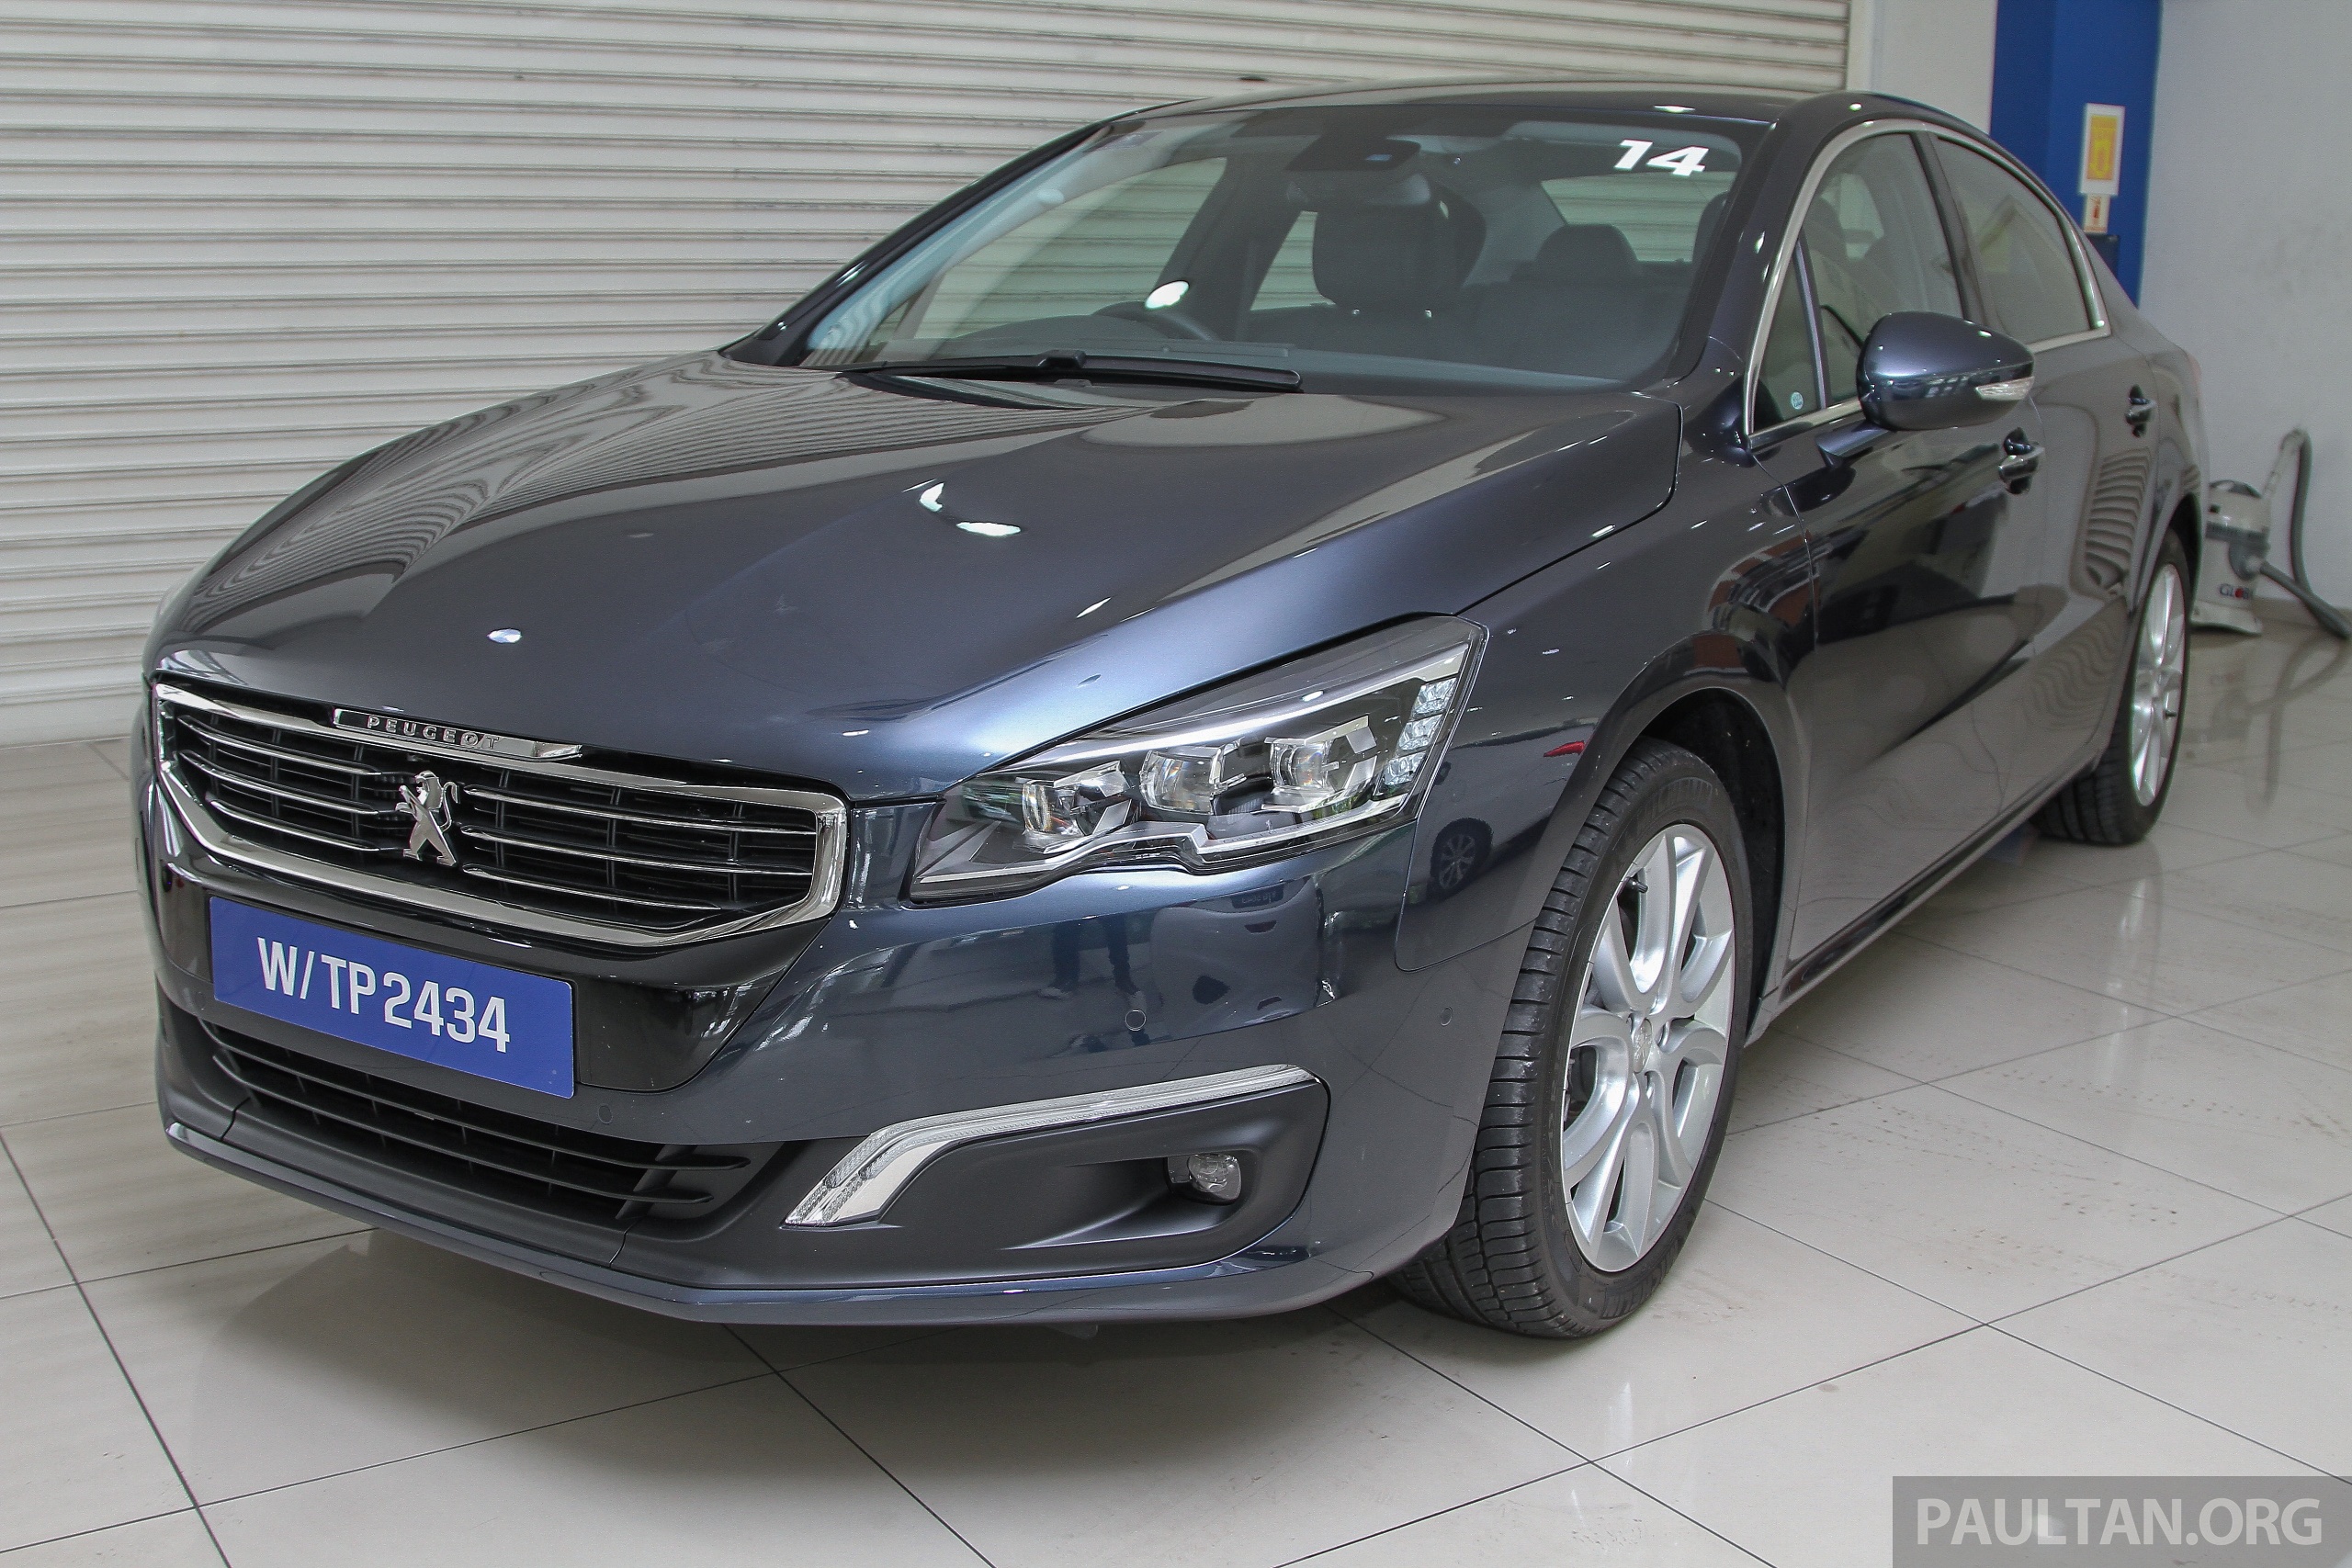 GALLERY Peugeot 508 THP facelift in showrooms